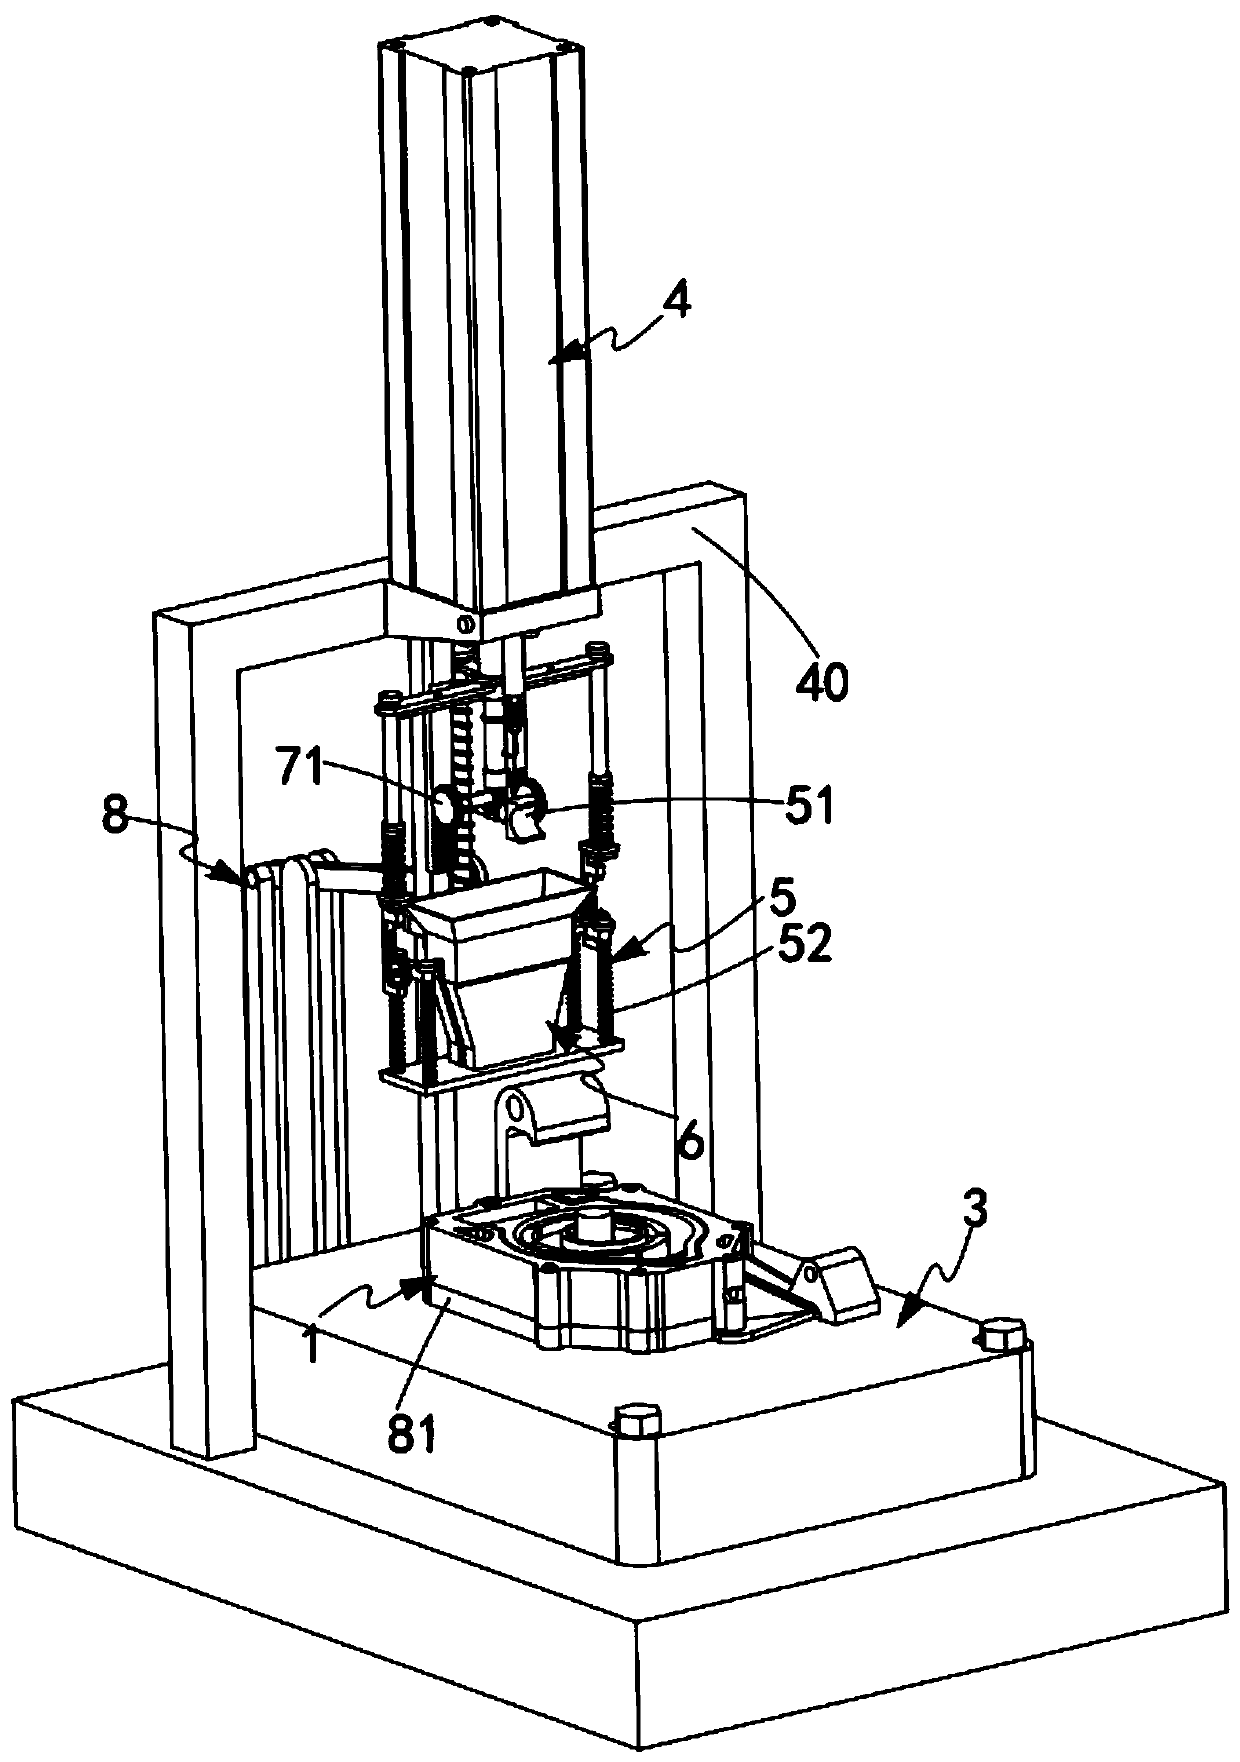 An automatic and precise assembly of an oil pump